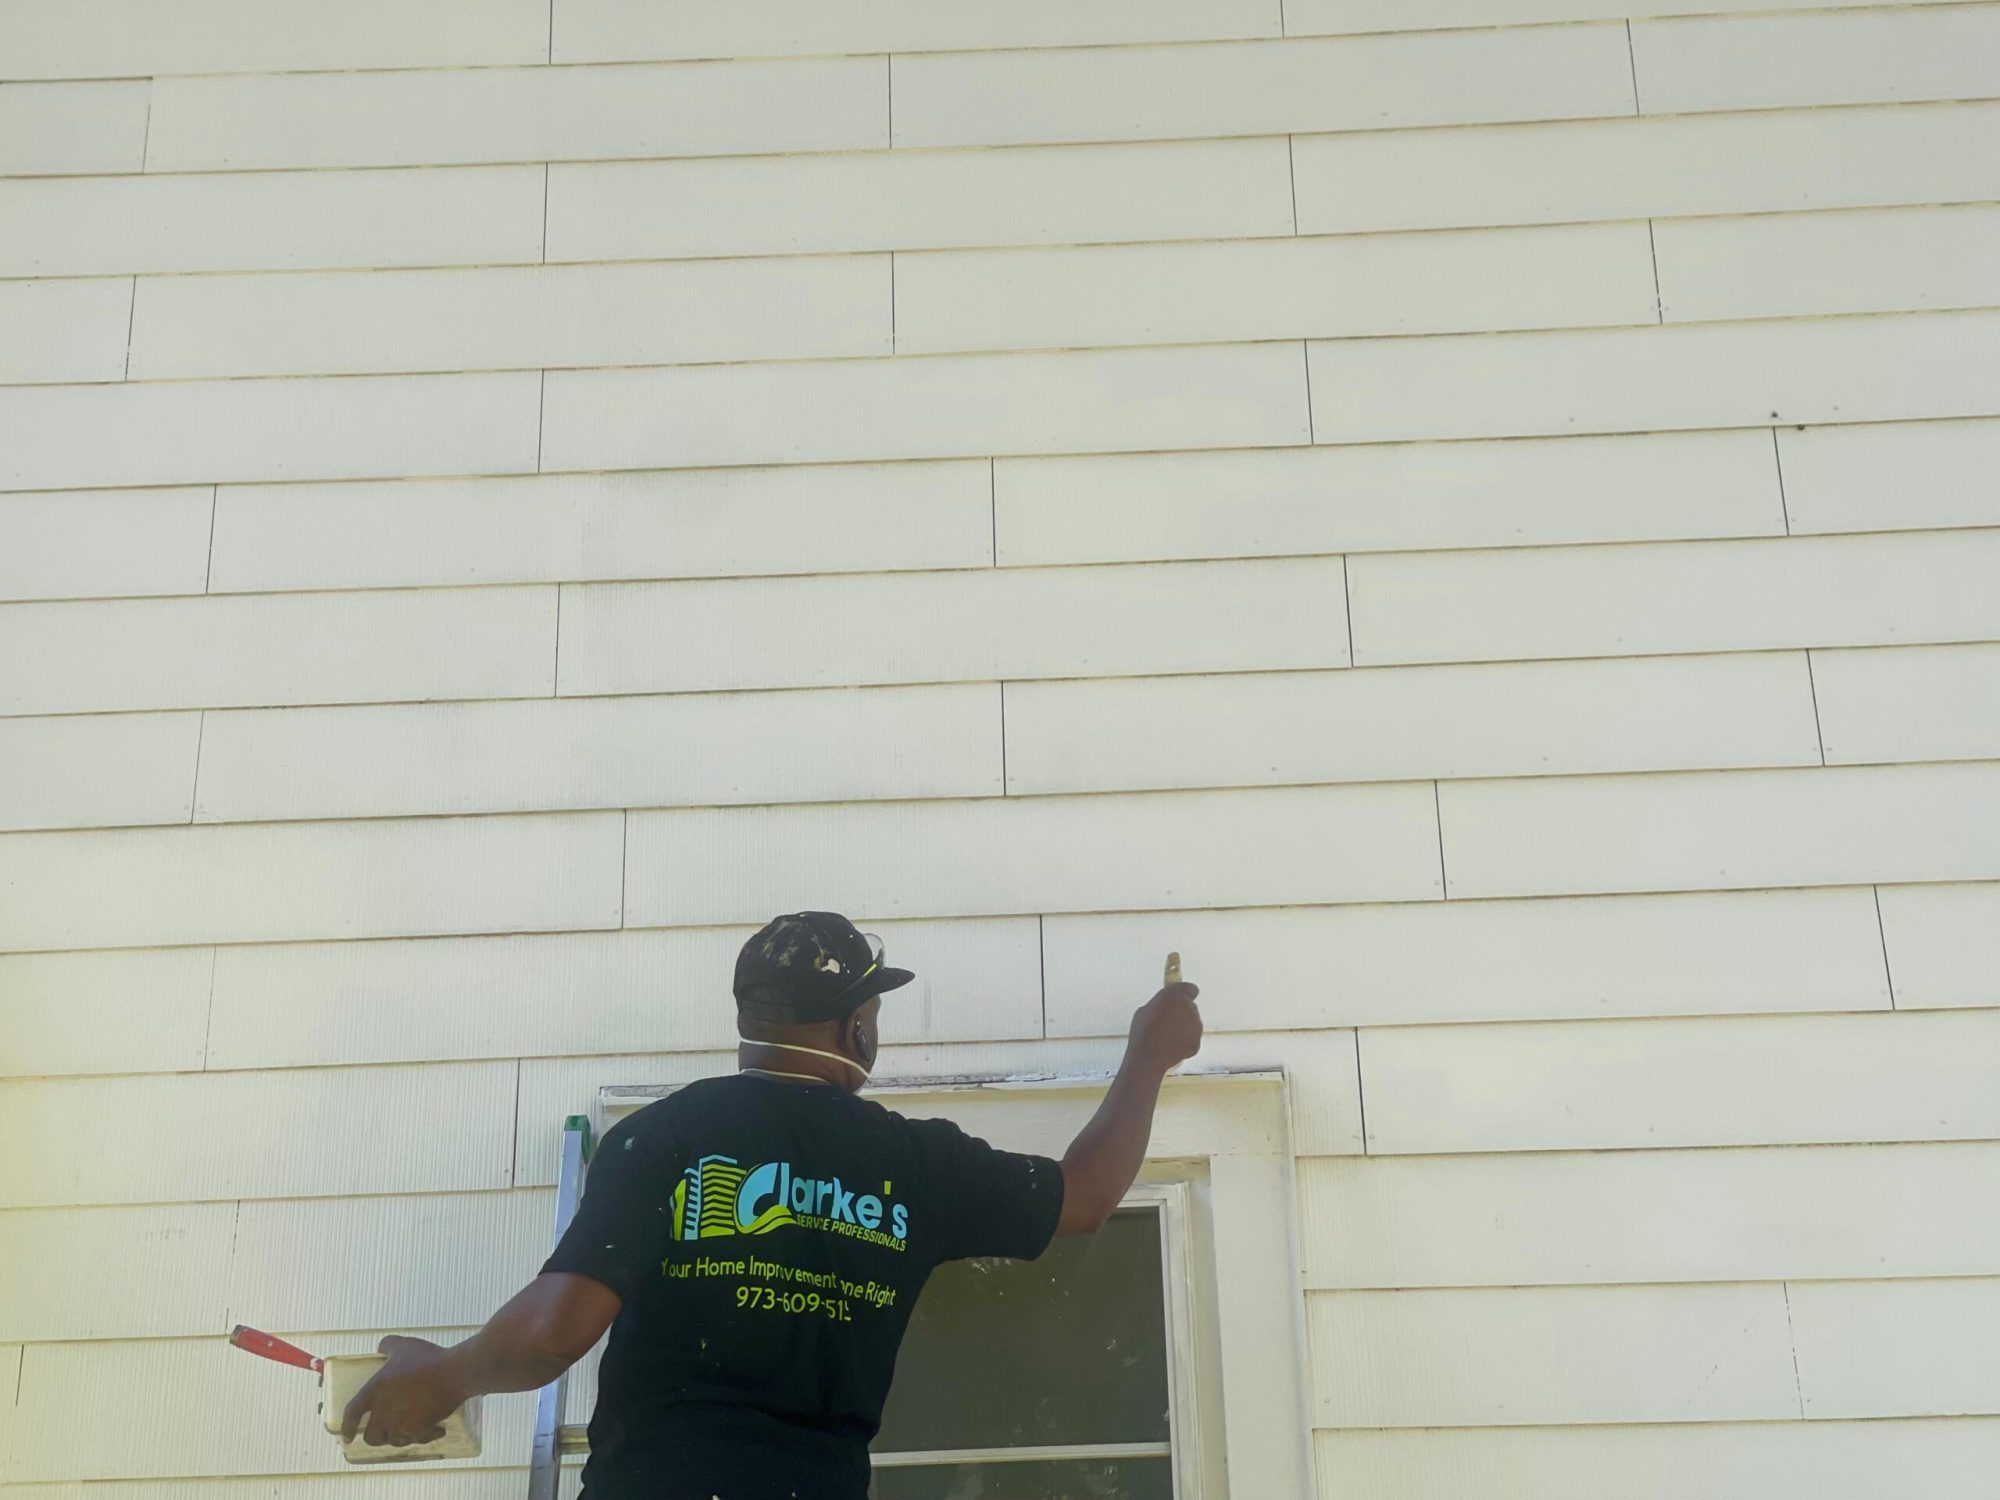 Clarke's professional painting the exterior wall of a building